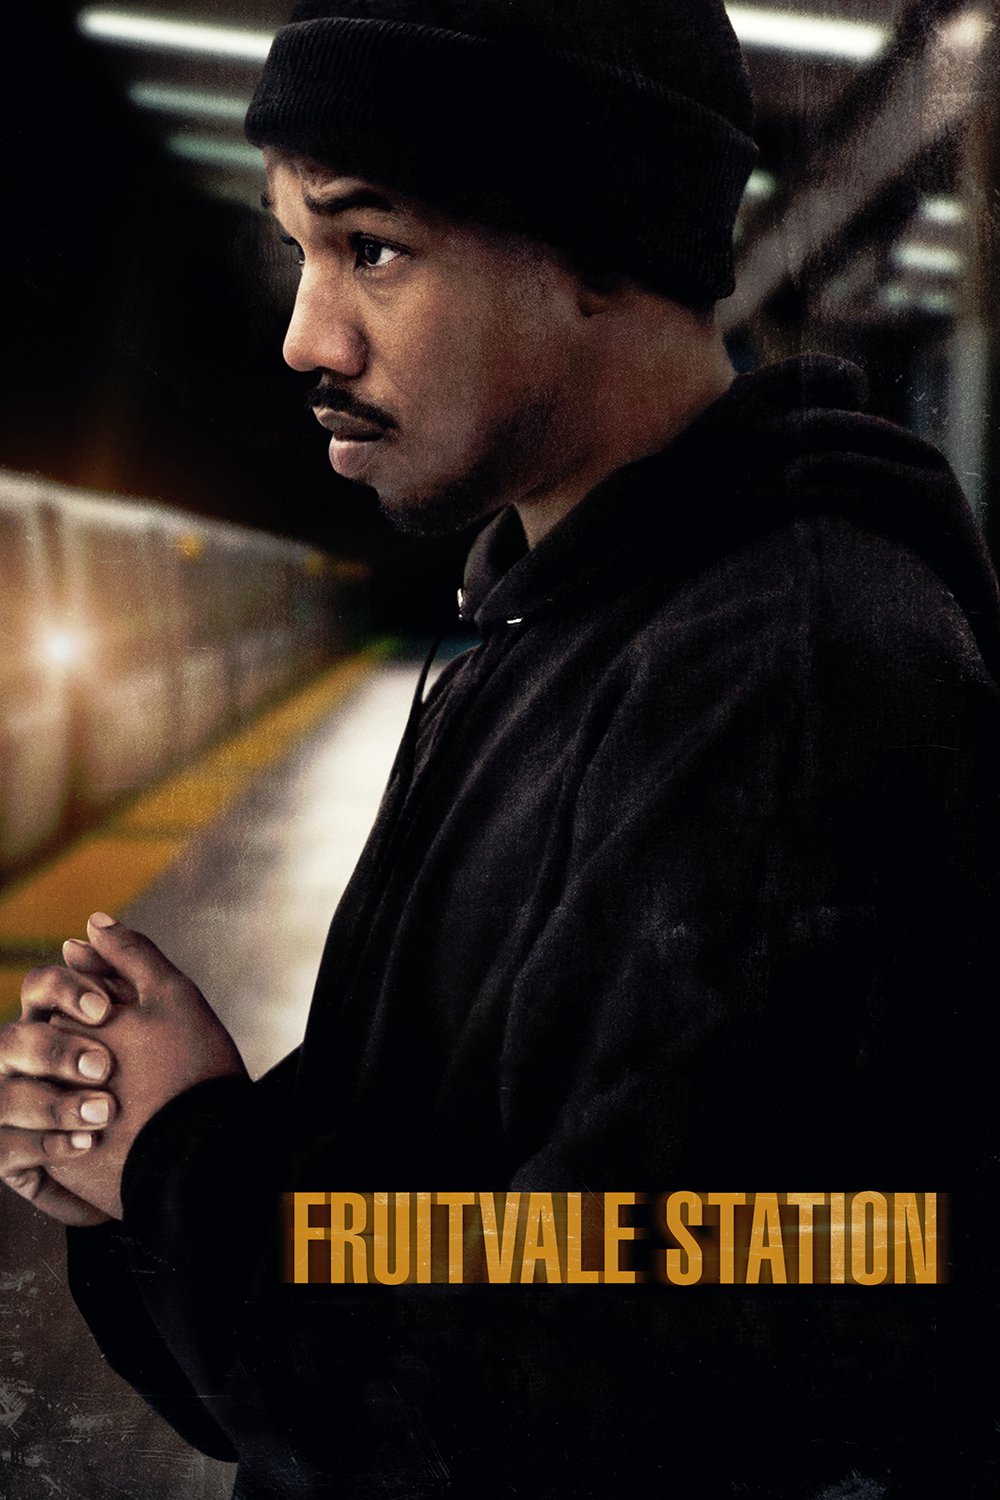 Poster for the movie "Fruitvale Station"